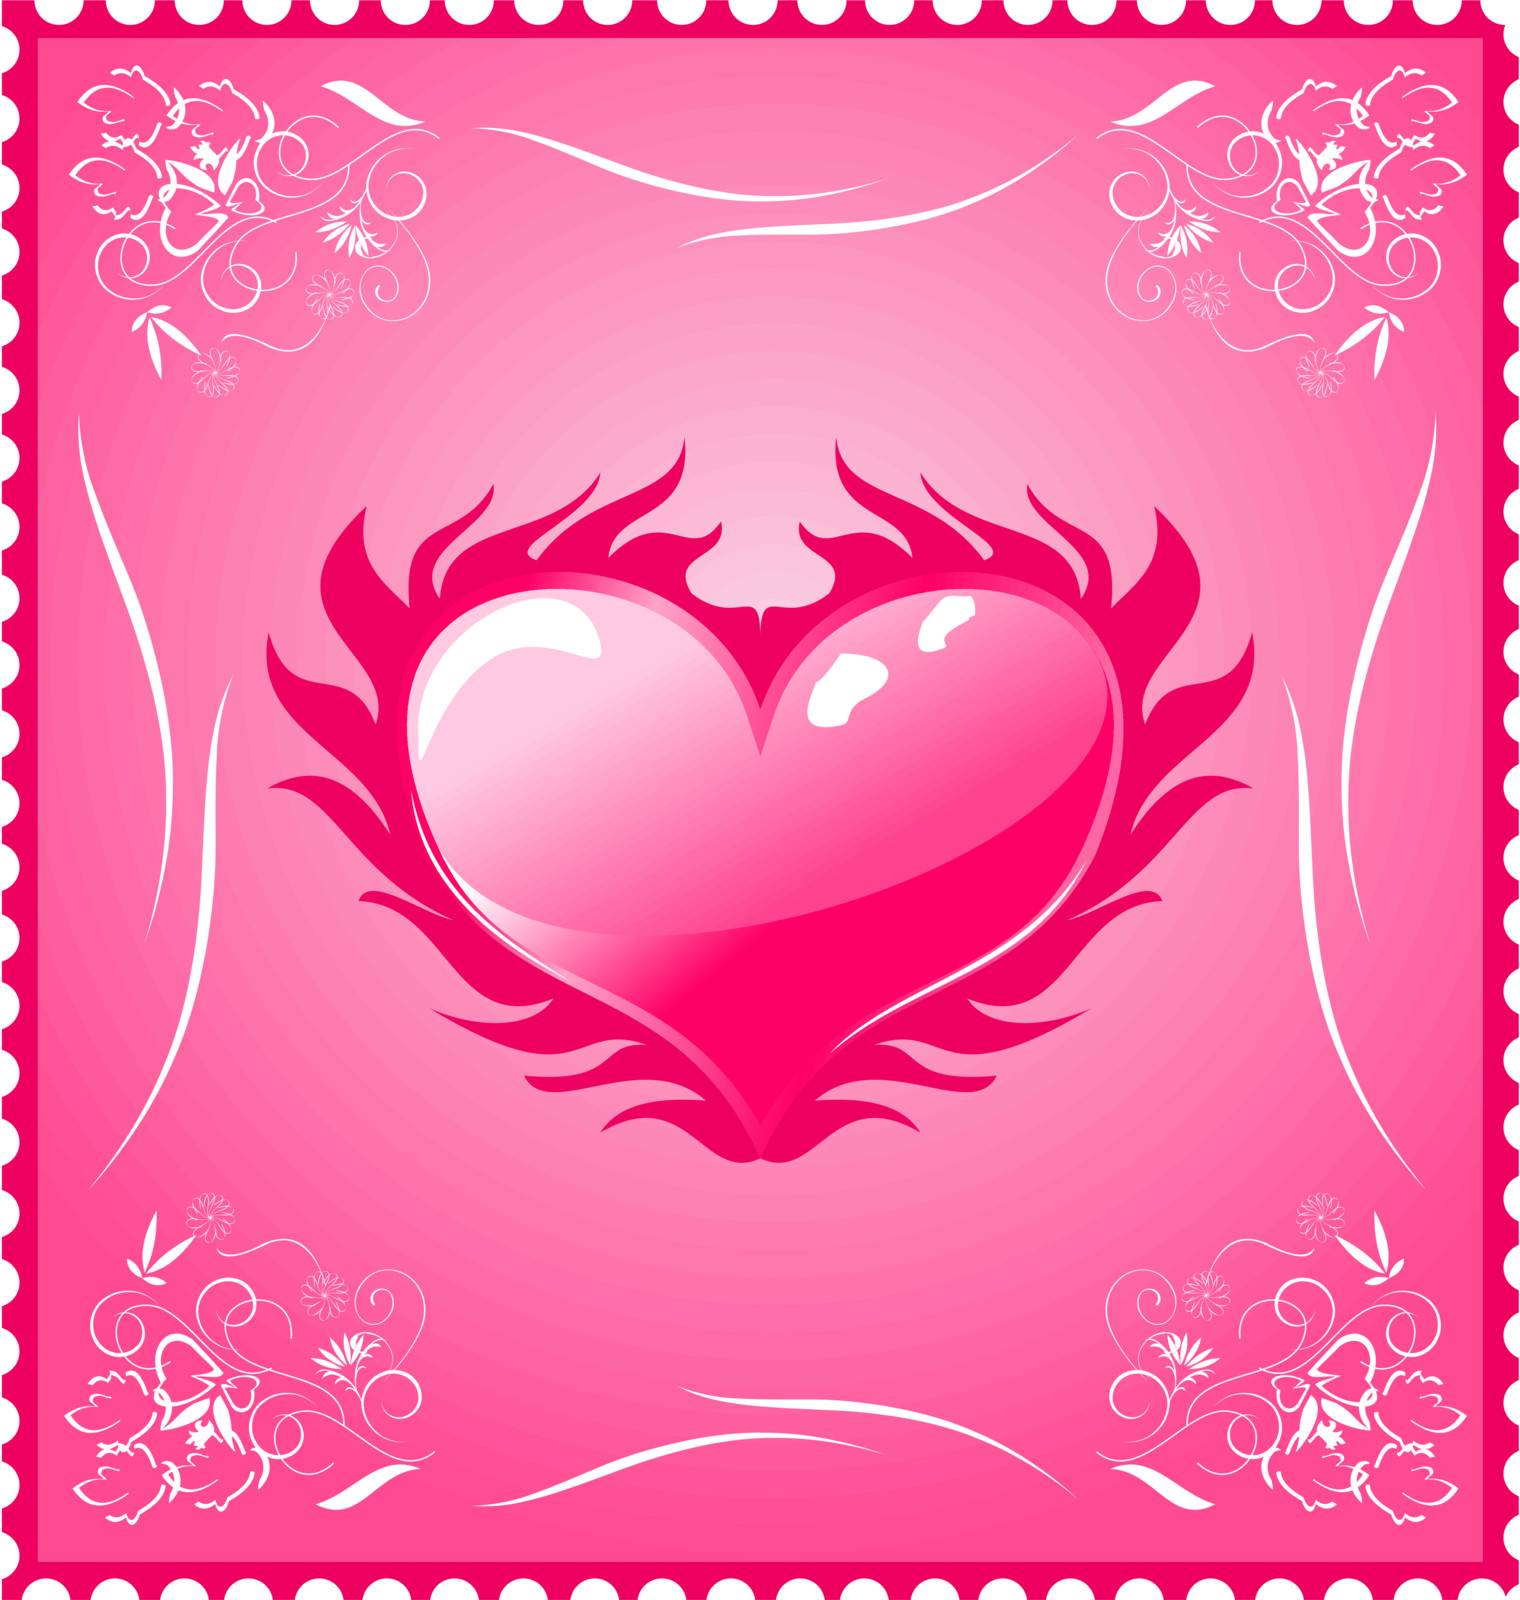 romantic stamp for Valentine's day by smeagorl